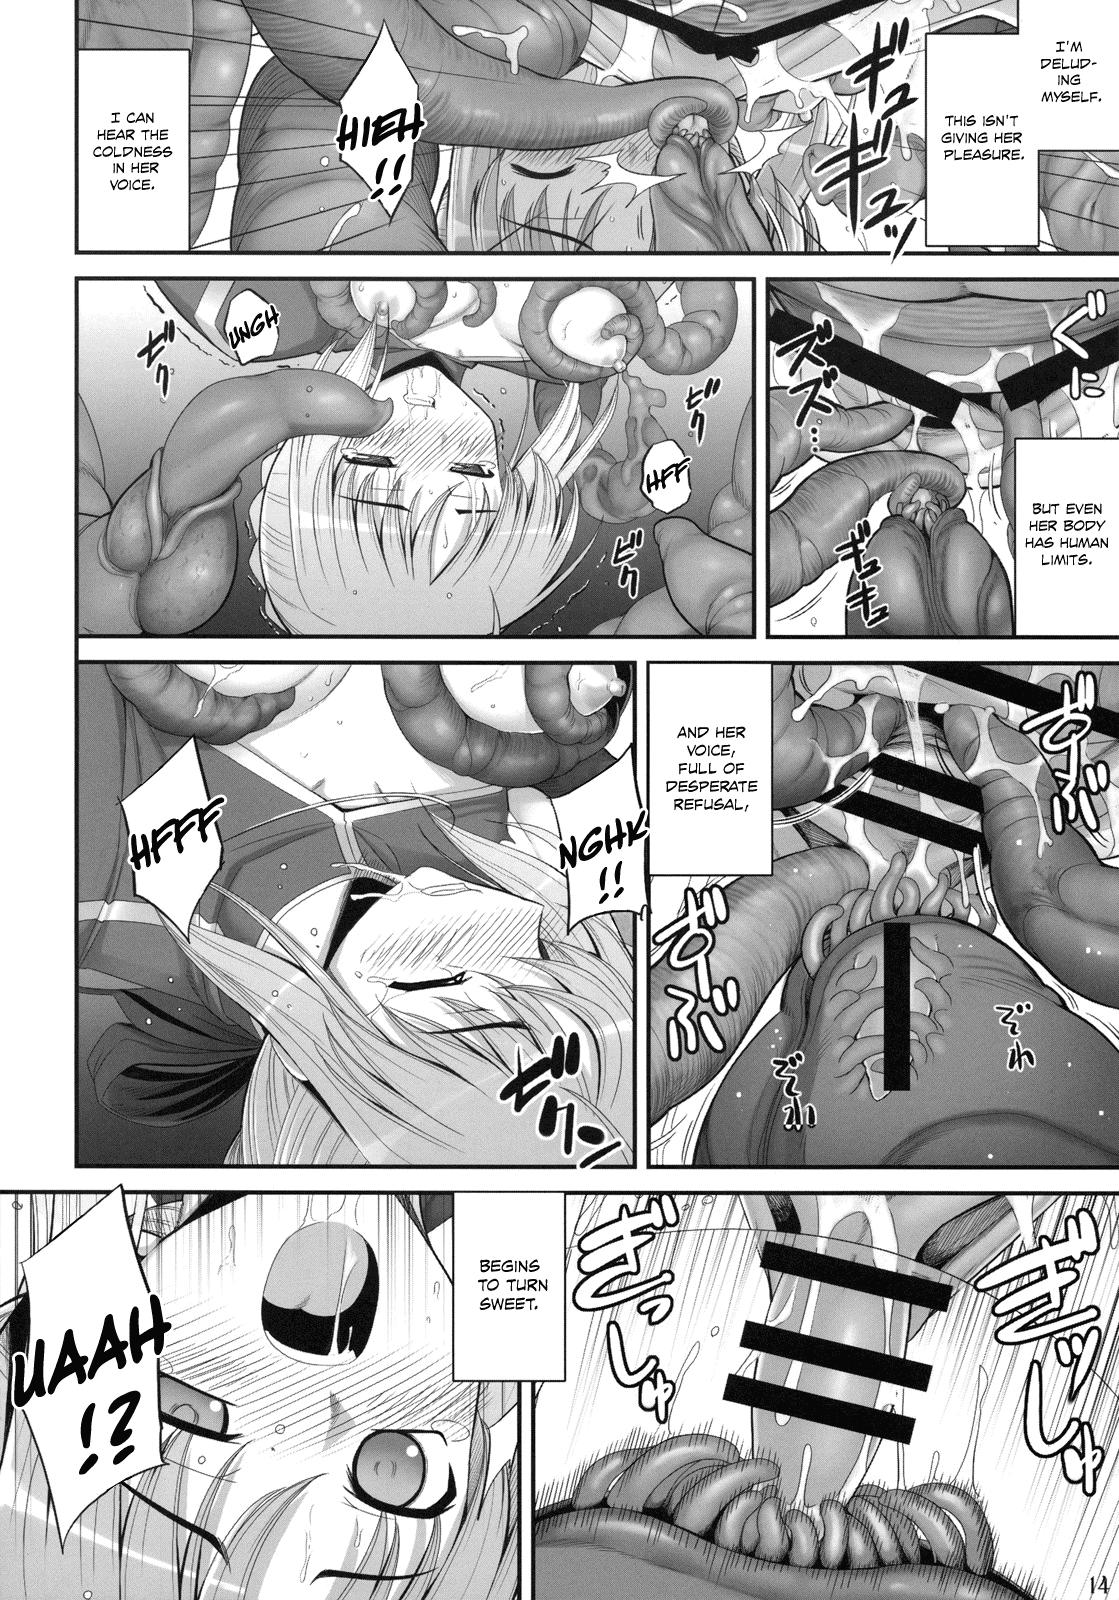 Small Tits Porn RE 09 - Fate stay night  - Page 13